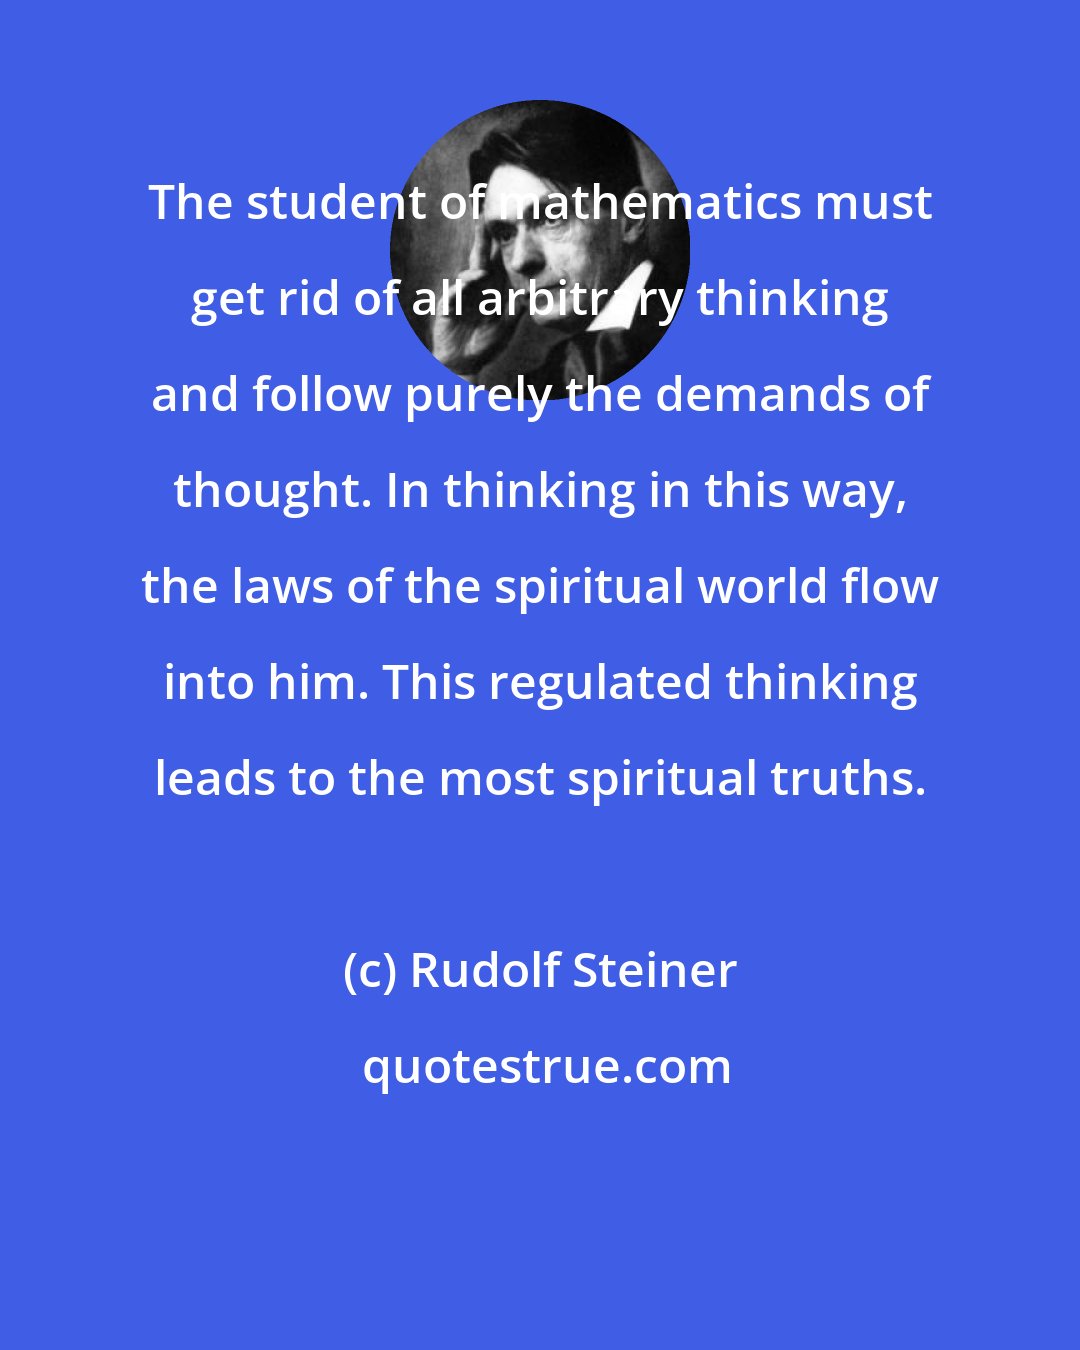 Rudolf Steiner: The student of mathematics must get rid of all arbitrary thinking and follow purely the demands of thought. In thinking in this way, the laws of the spiritual world flow into him. This regulated thinking leads to the most spiritual truths.